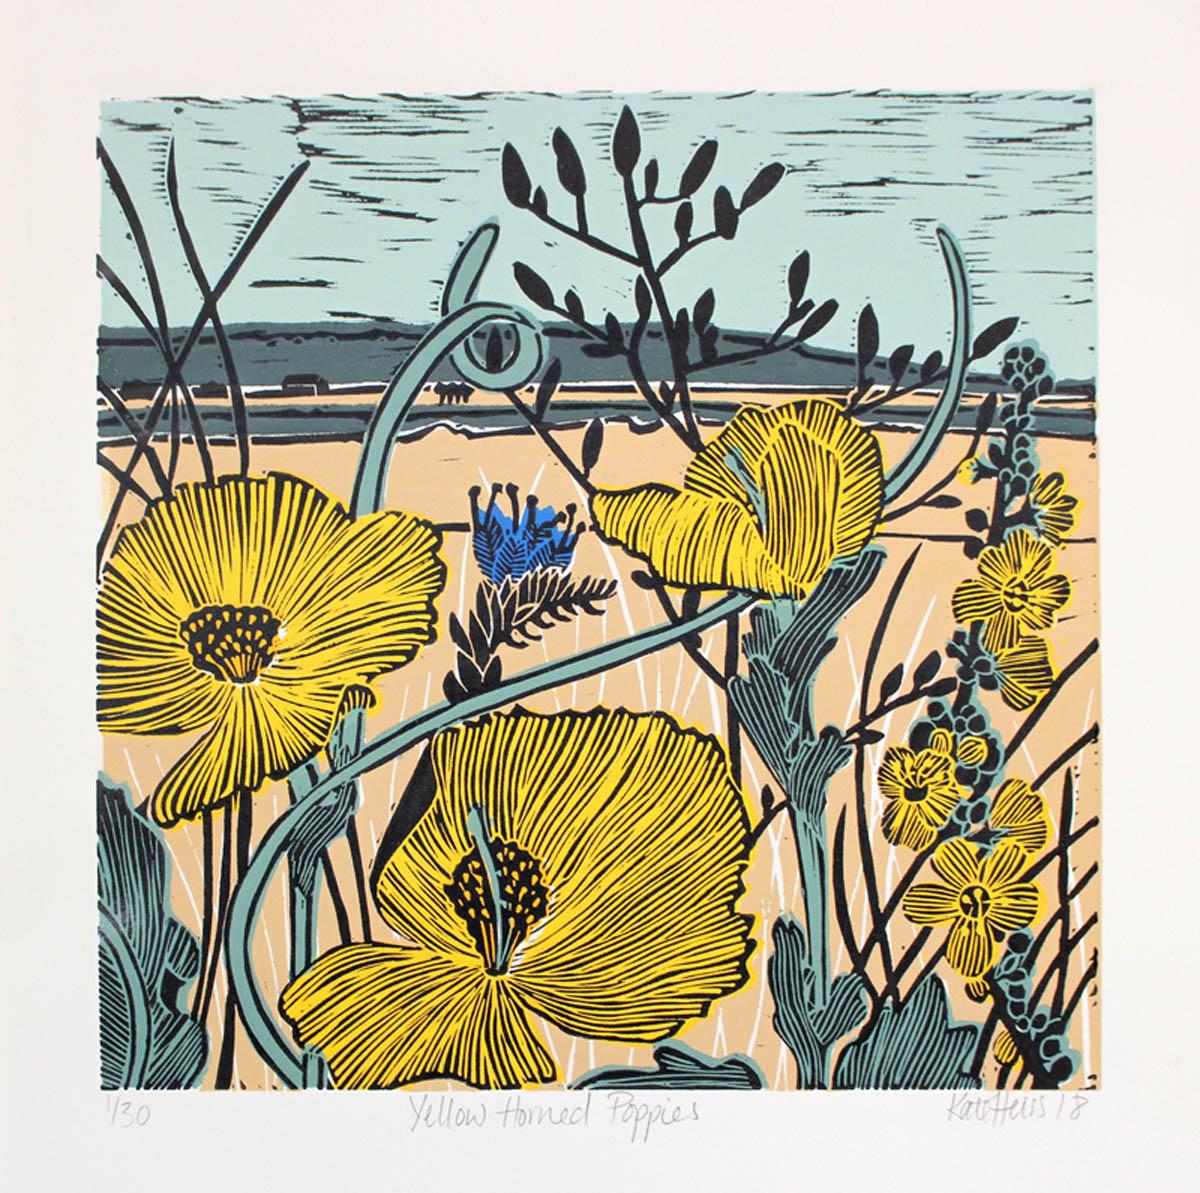 Yellow Horned Poppy, Kate Heiss, Limited Edition linocut, Poppies, Fields